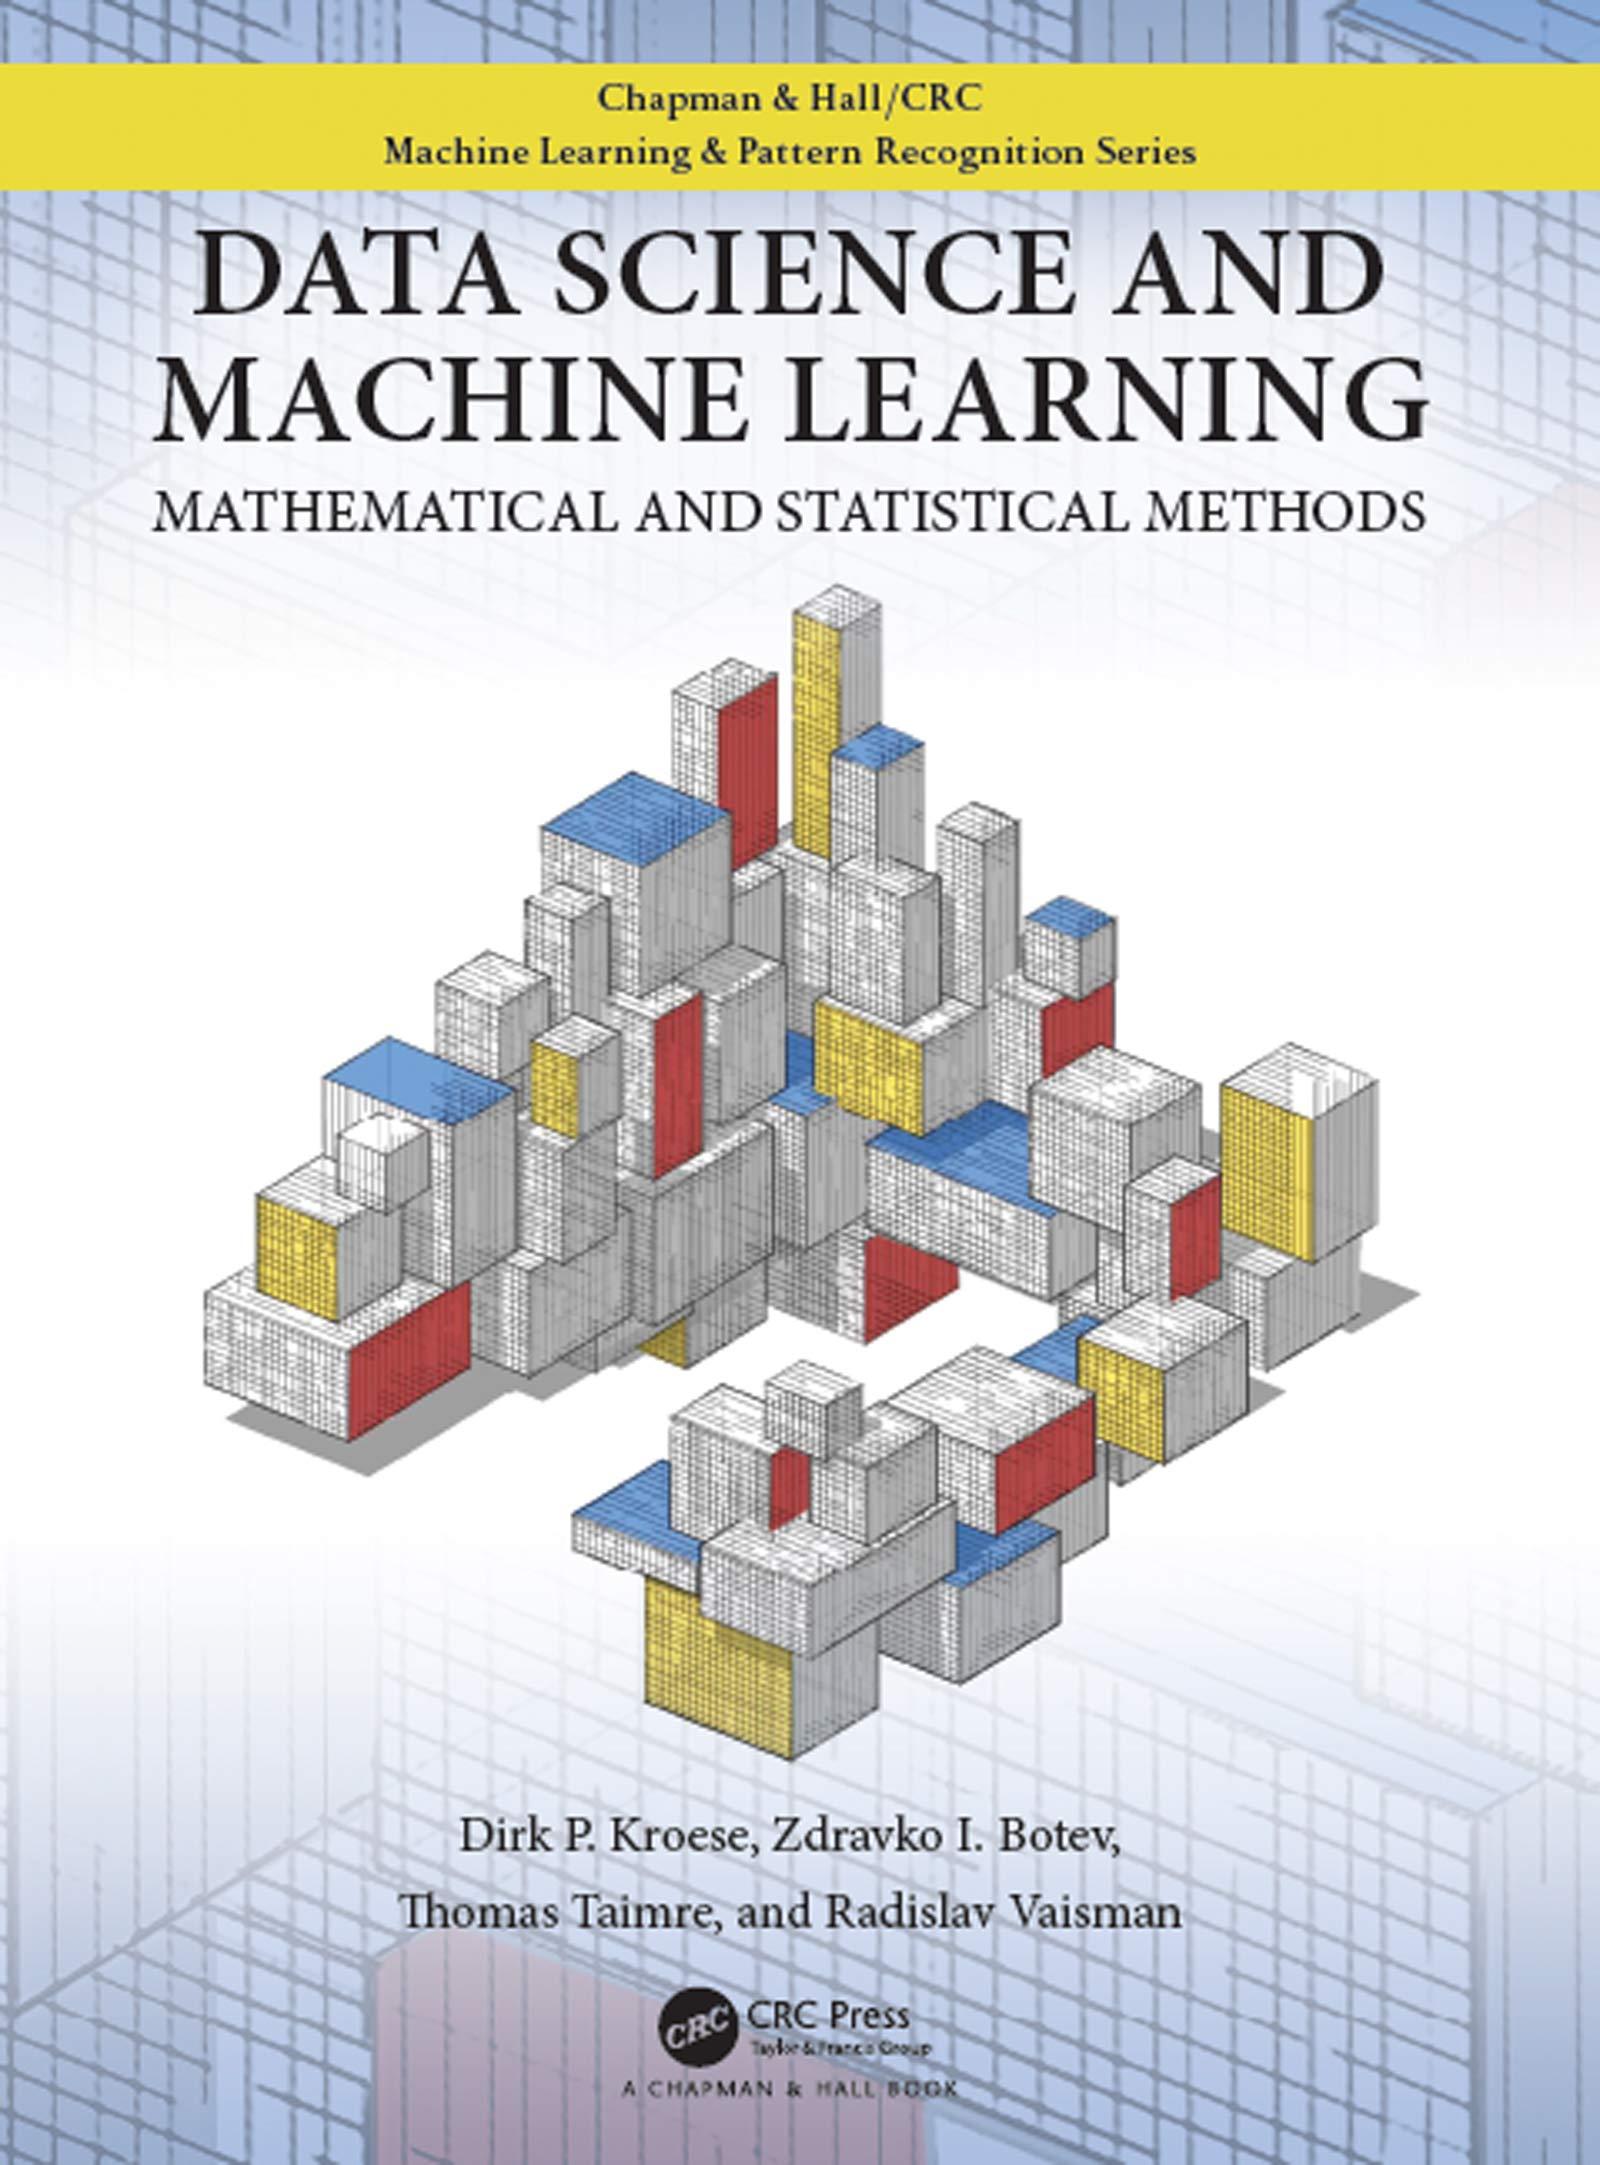 data science and machine learning mathematical and statistical methods 1st edition dirk p. kroese, thomas